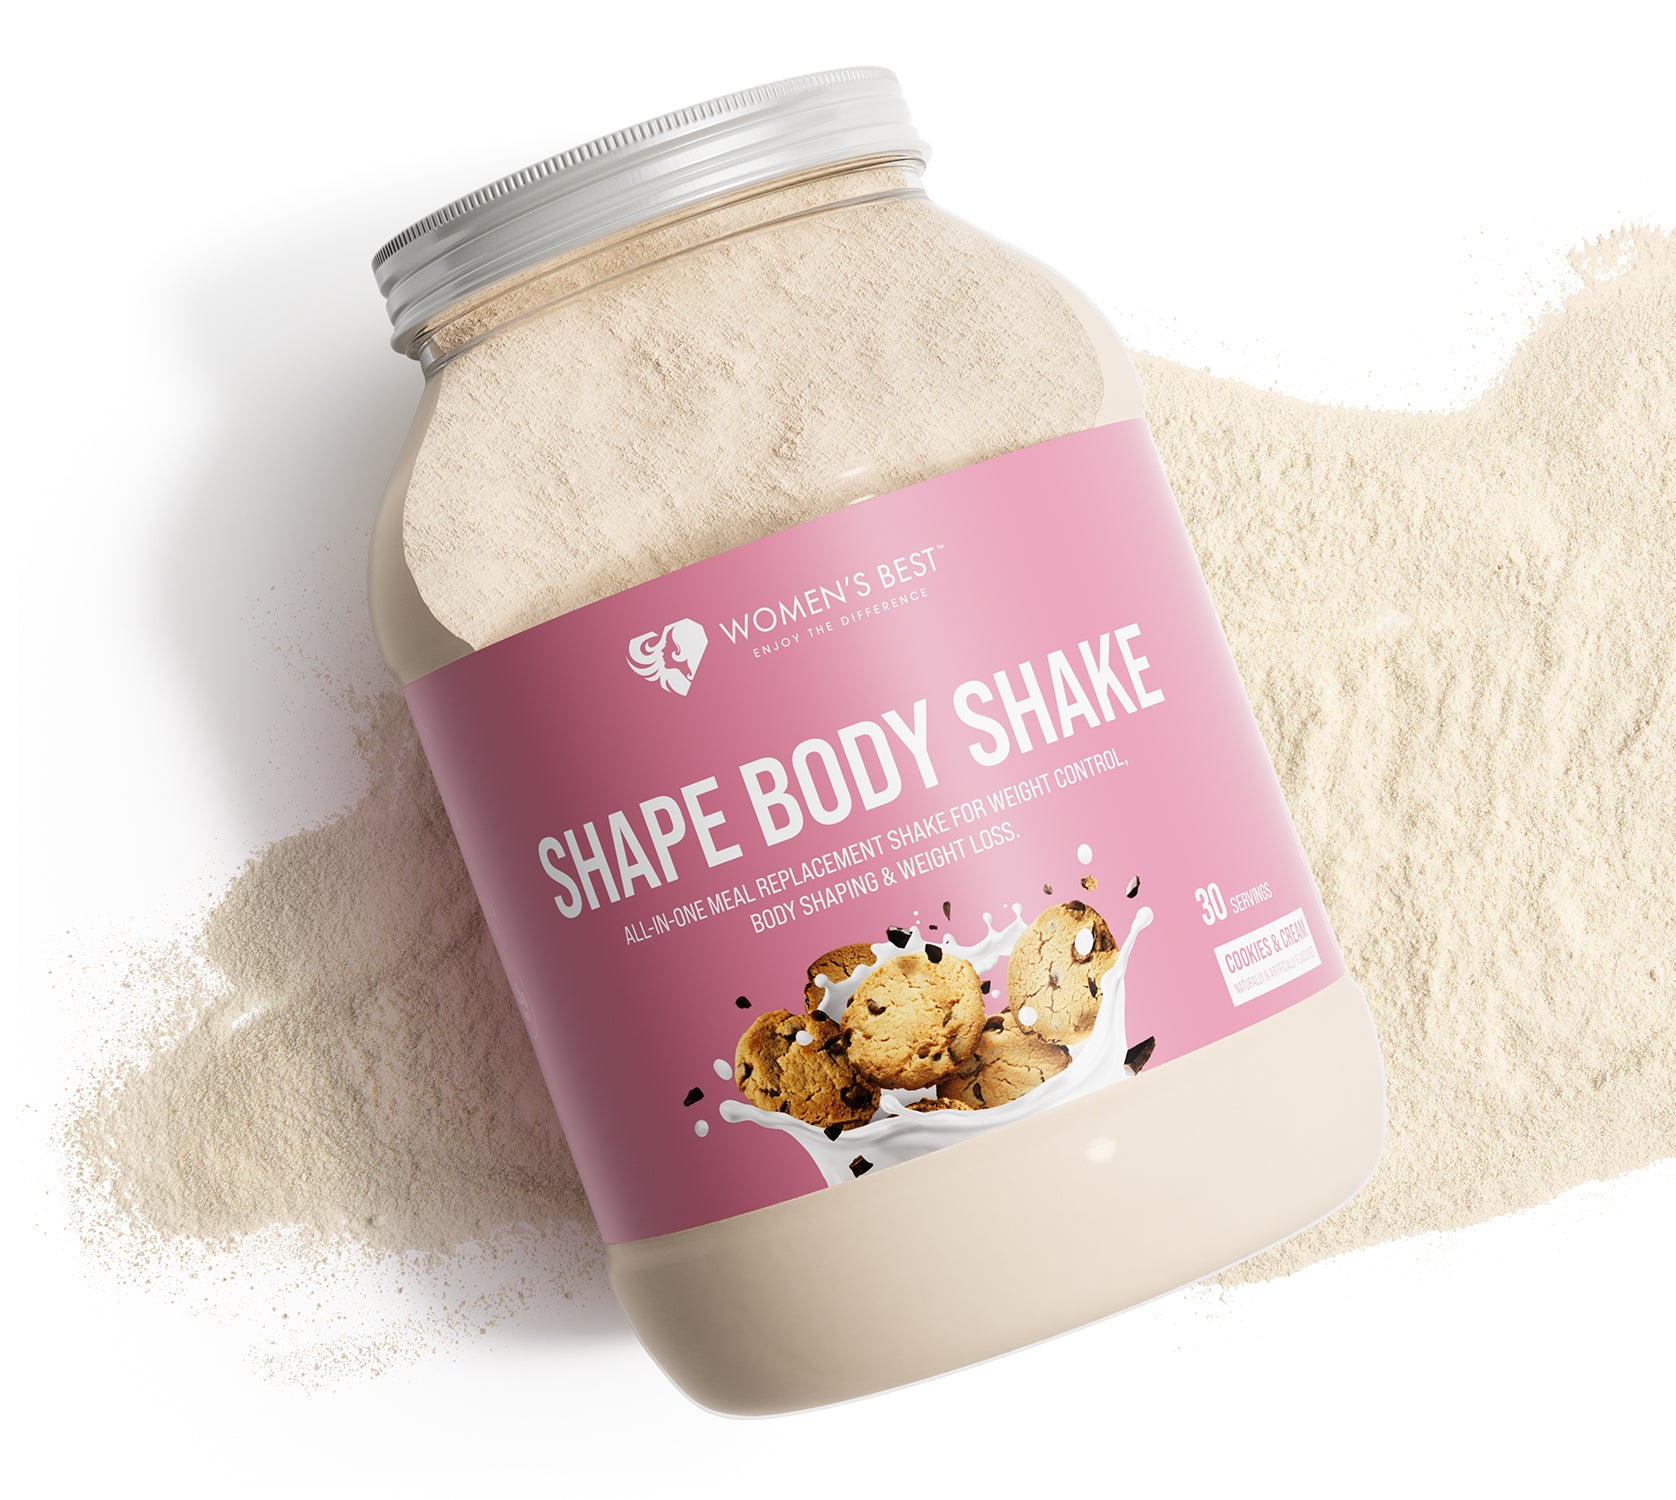 7 Popular Weight Loss Shakes for Females